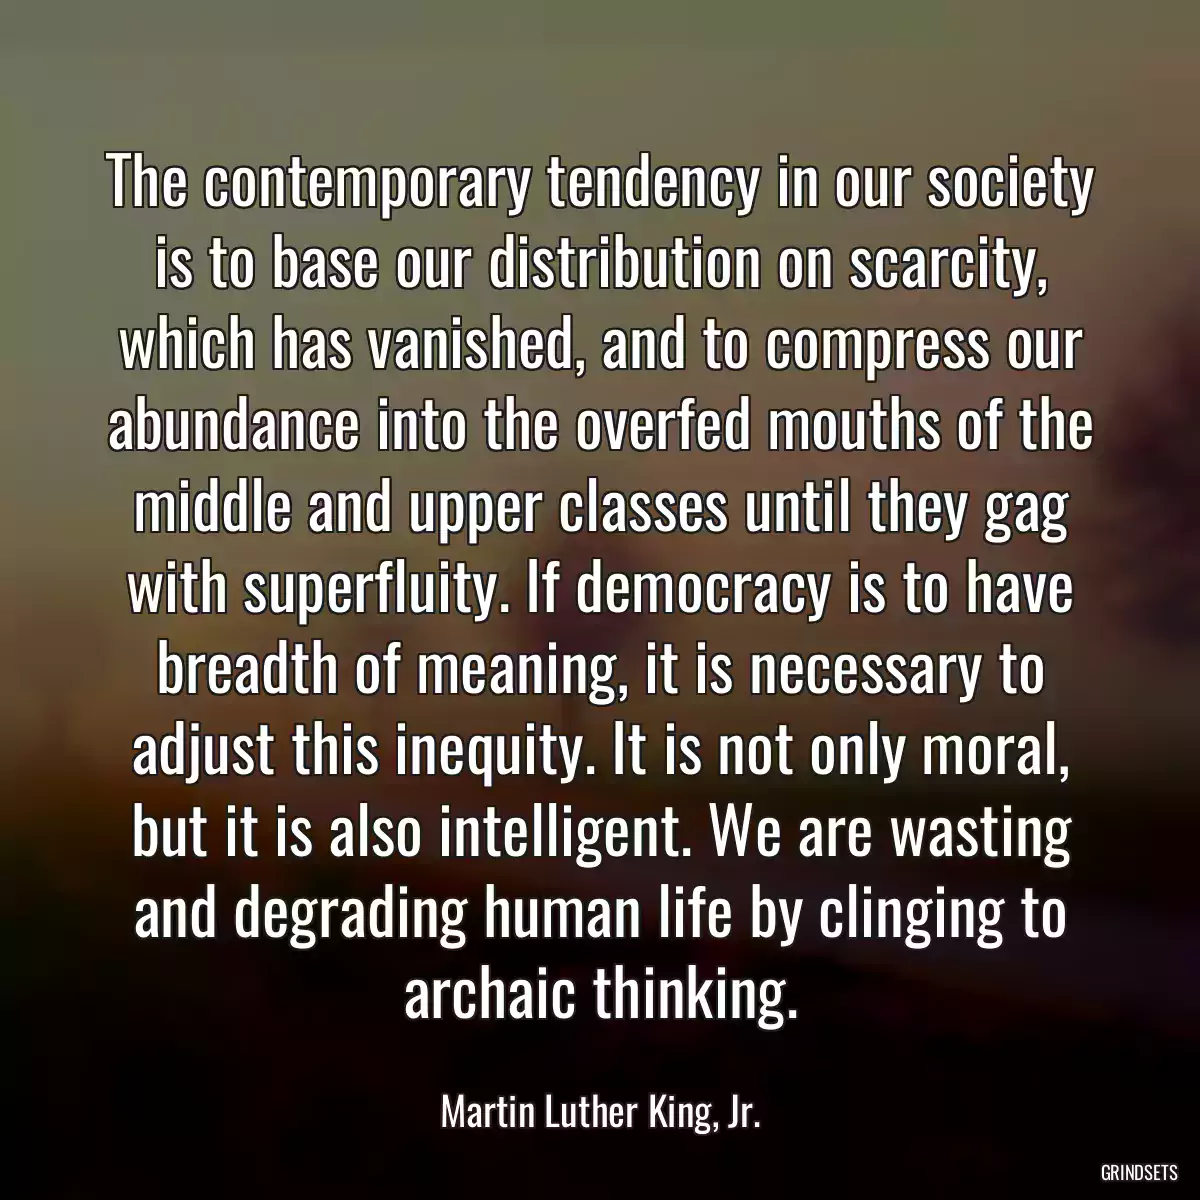 The contemporary tendency in our society is to base our distribution on scarcity, which has vanished, and to compress our abundance into the overfed mouths of the middle and upper classes until they gag with superfluity. If democracy is to have breadth of meaning, it is necessary to adjust this inequity. It is not only moral, but it is also intelligent. We are wasting and degrading human life by clinging to archaic thinking.